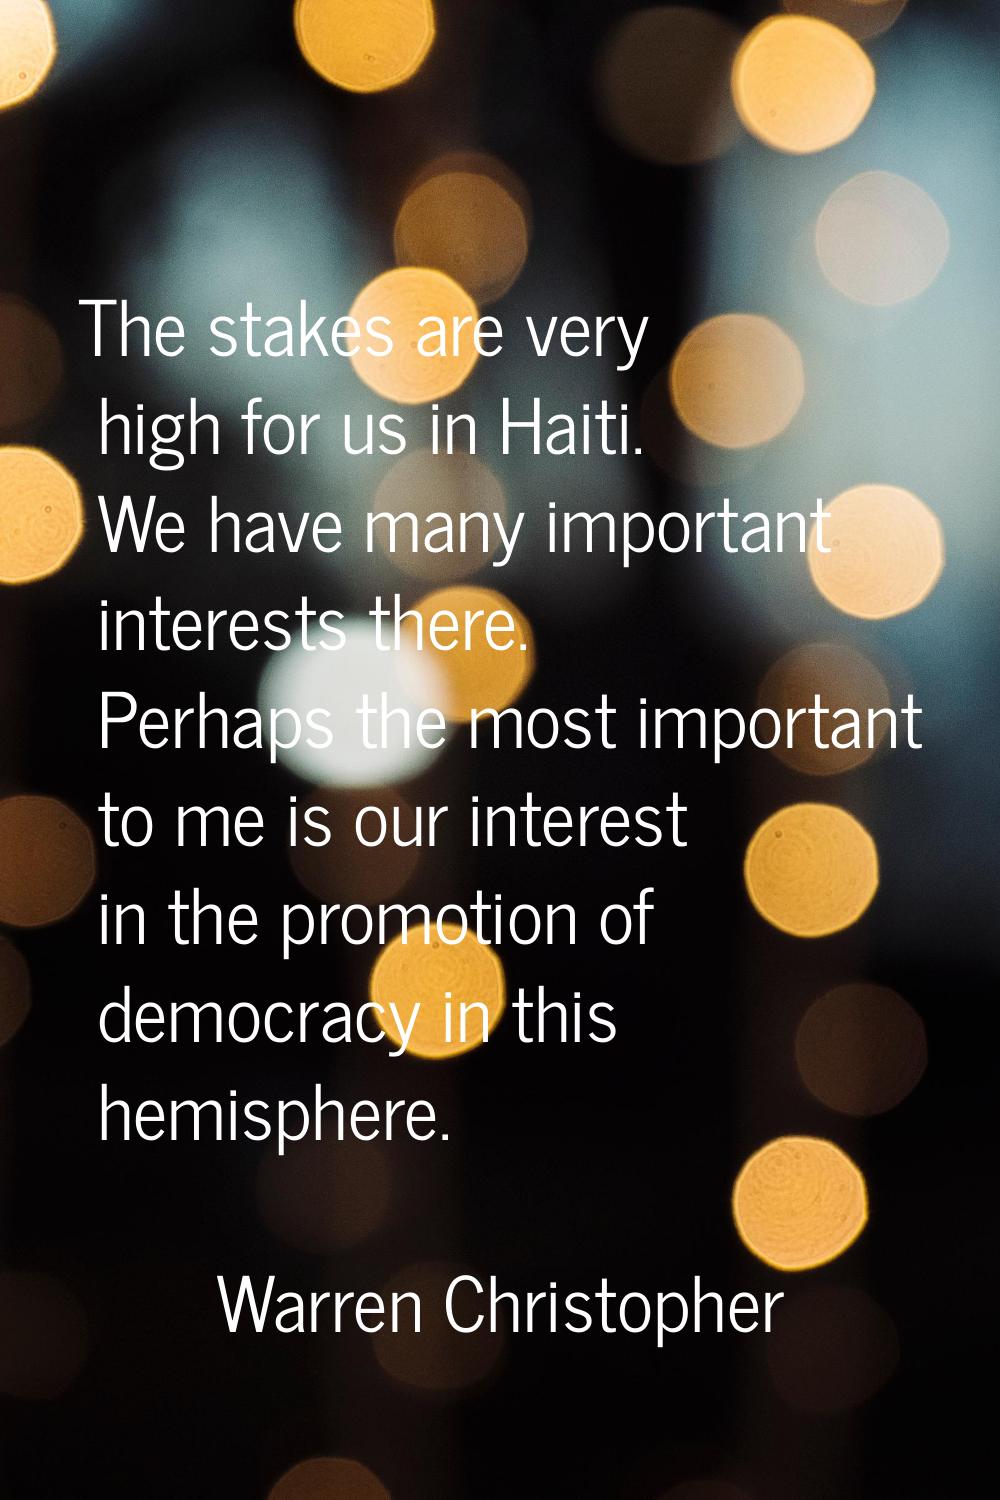 The stakes are very high for us in Haiti. We have many important interests there. Perhaps the most 